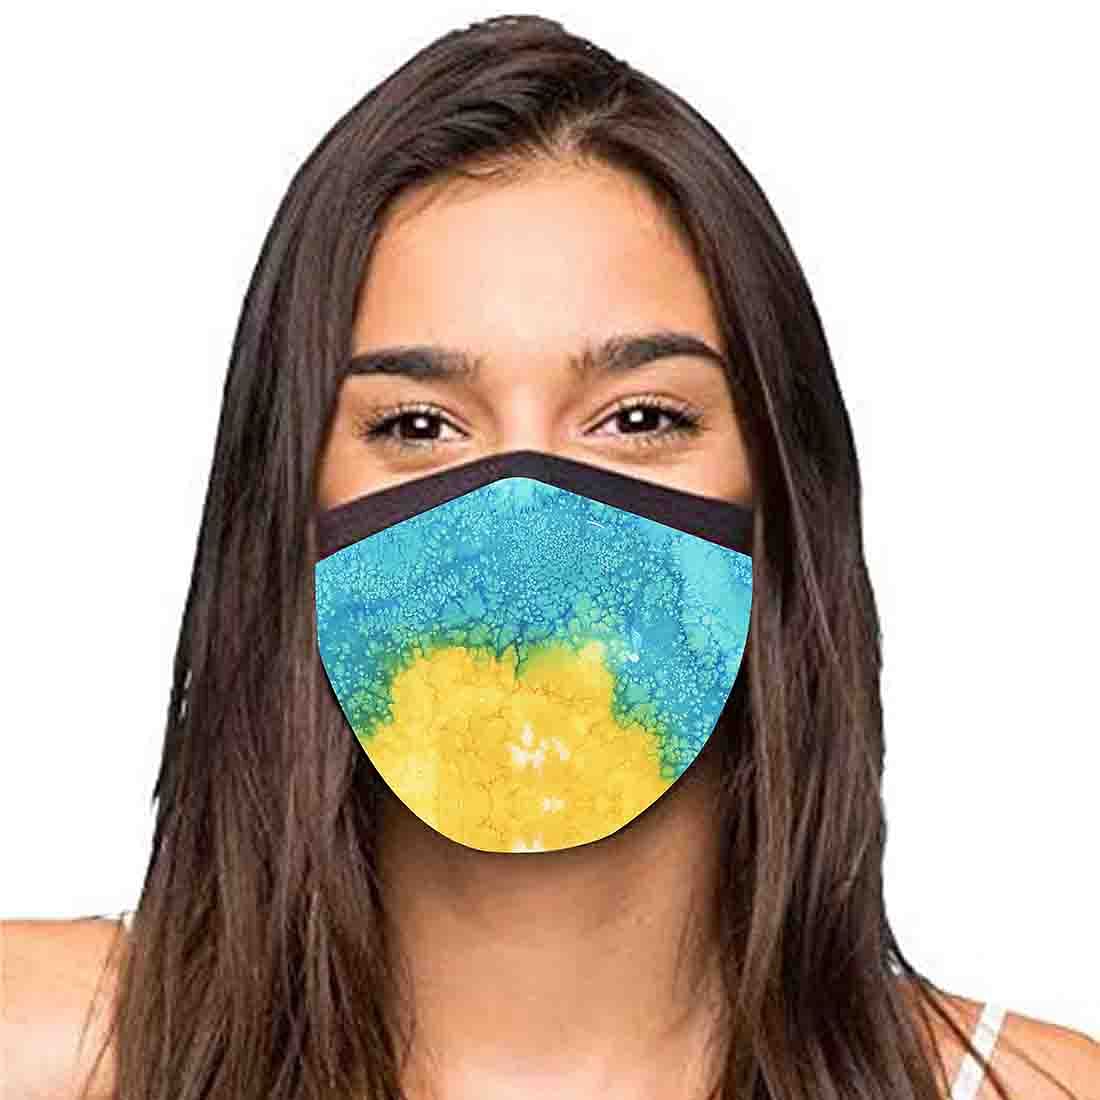 Face Mask For Women - Set Of 2 Protective Masks -Yellow Blue Watercolor Nutcase